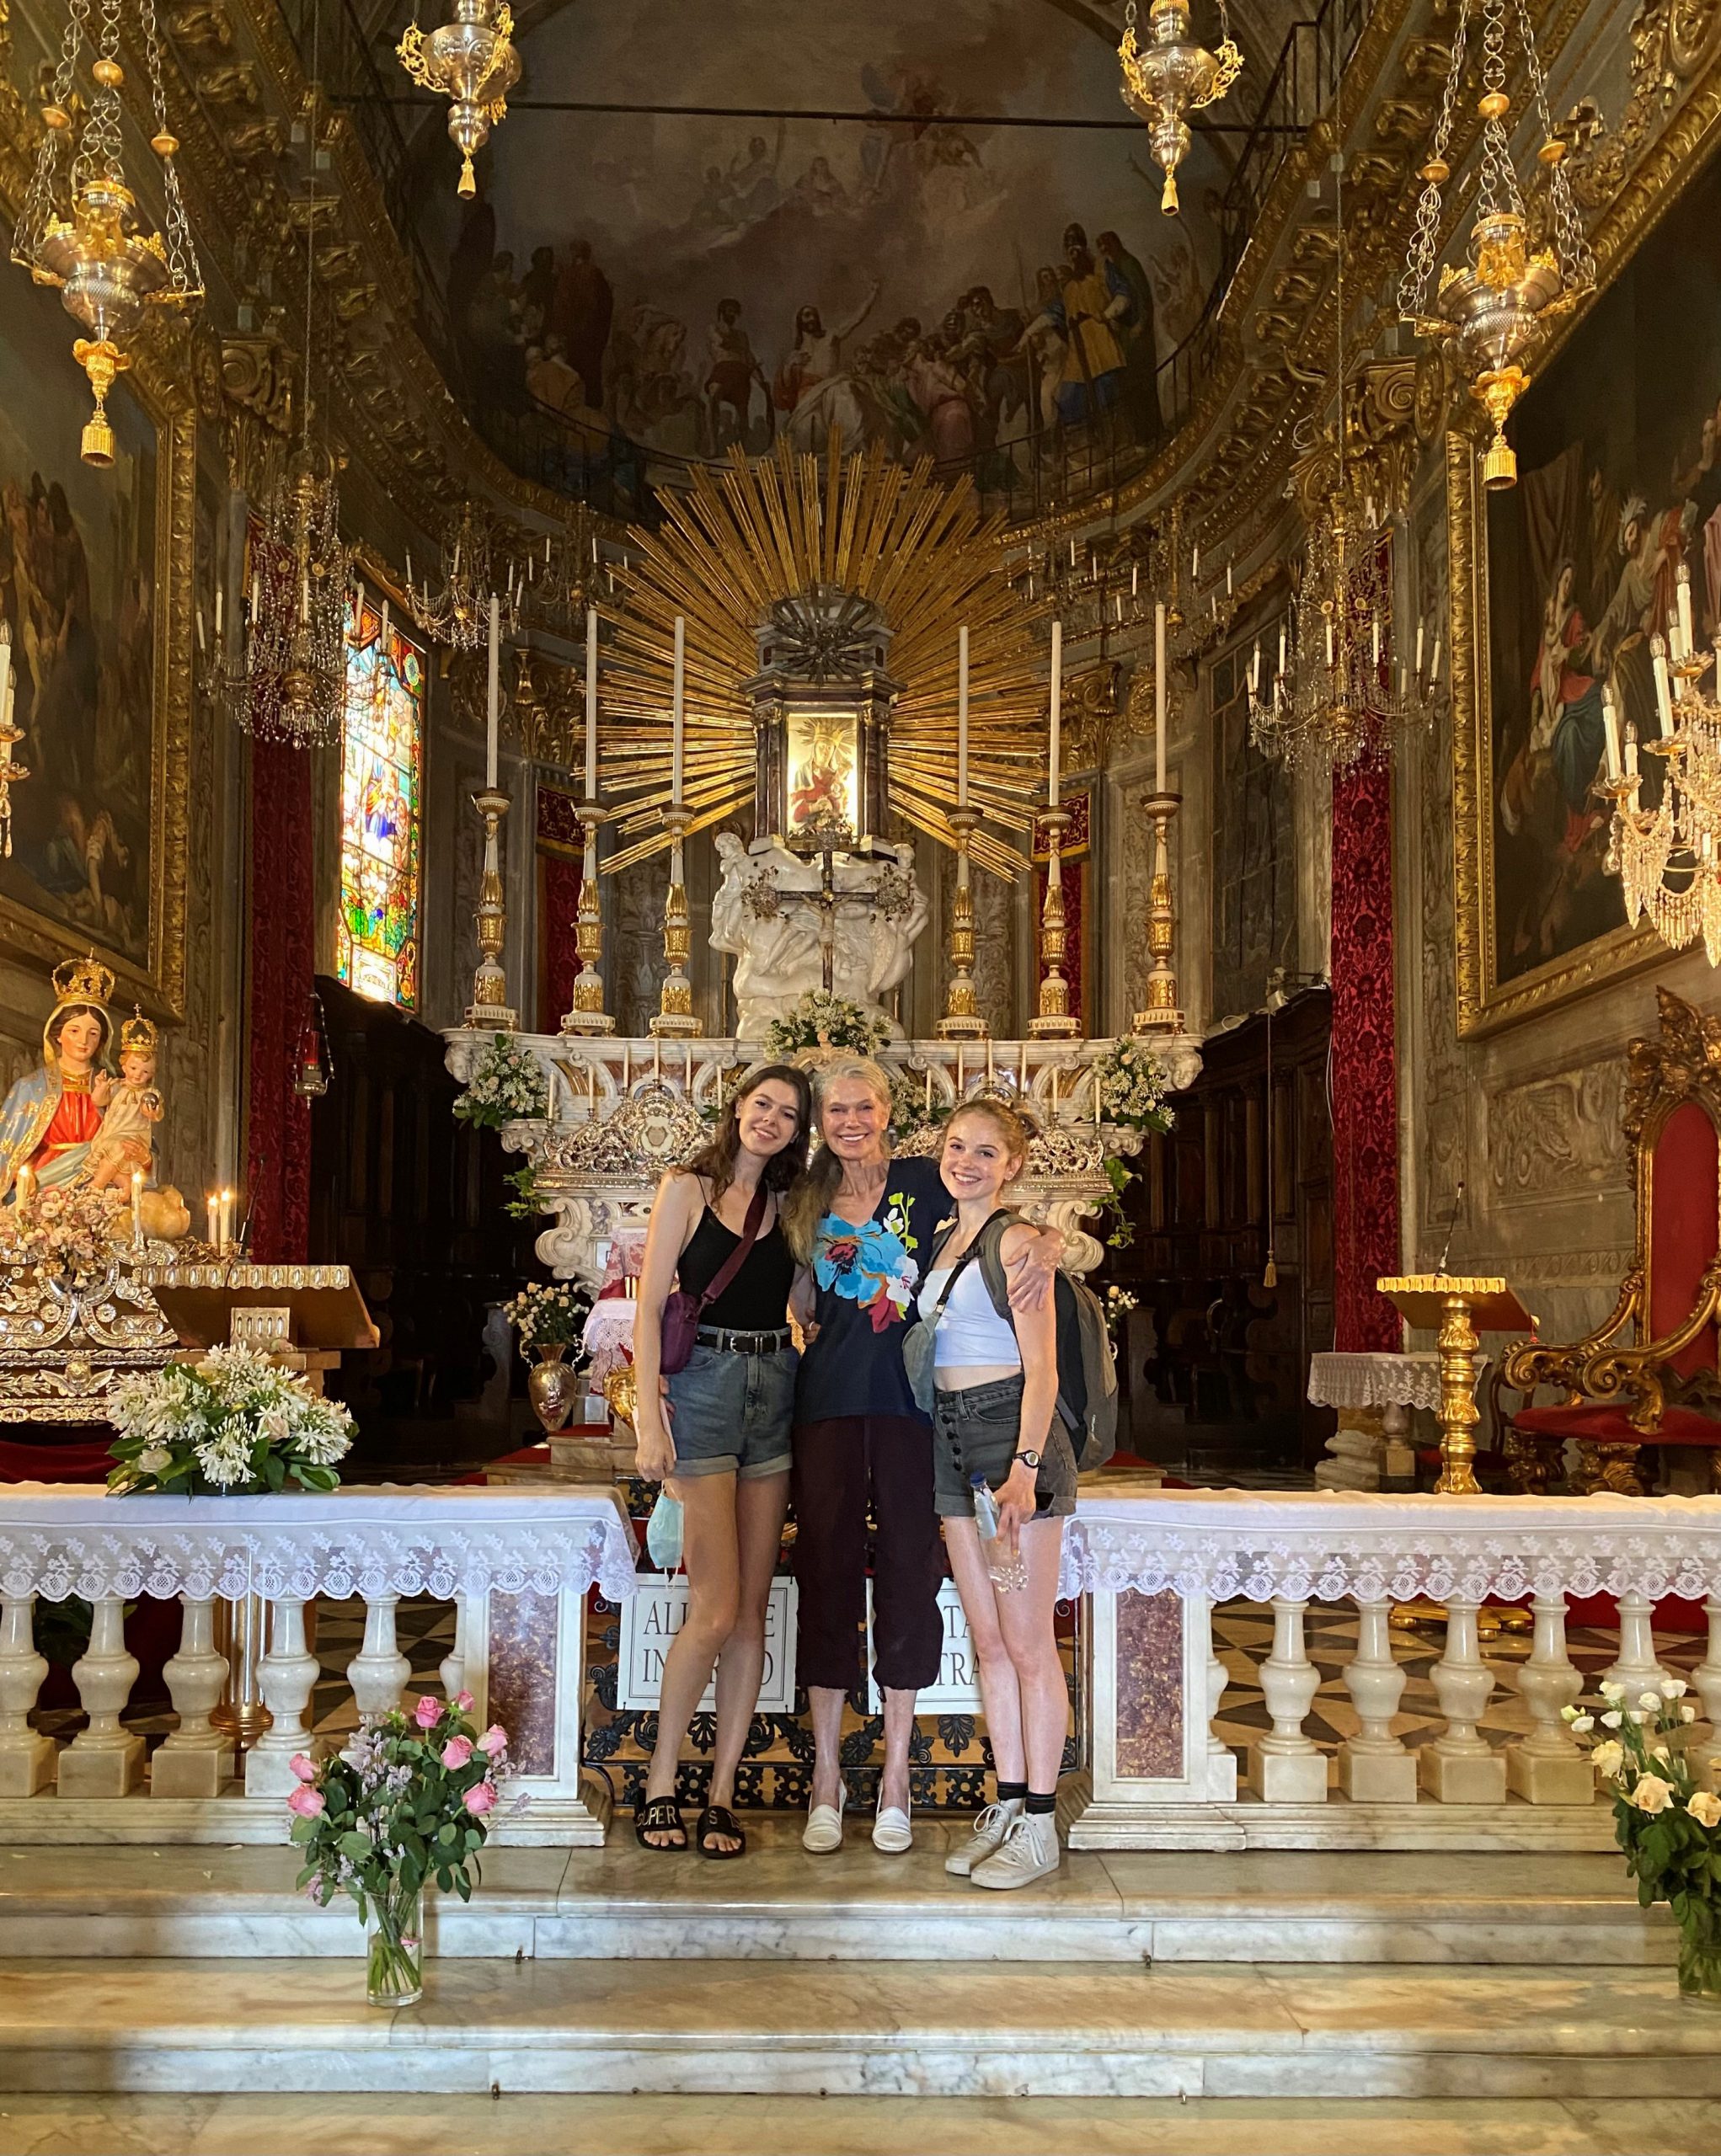 Many of the fragments Jean uses in her artistic creations come from places like this 17th century Baroque church. Grace, Jean, and Joybelle Barlow visit Chiesa San Giacomo di Corte in San Margherita Ligure, Italy. 